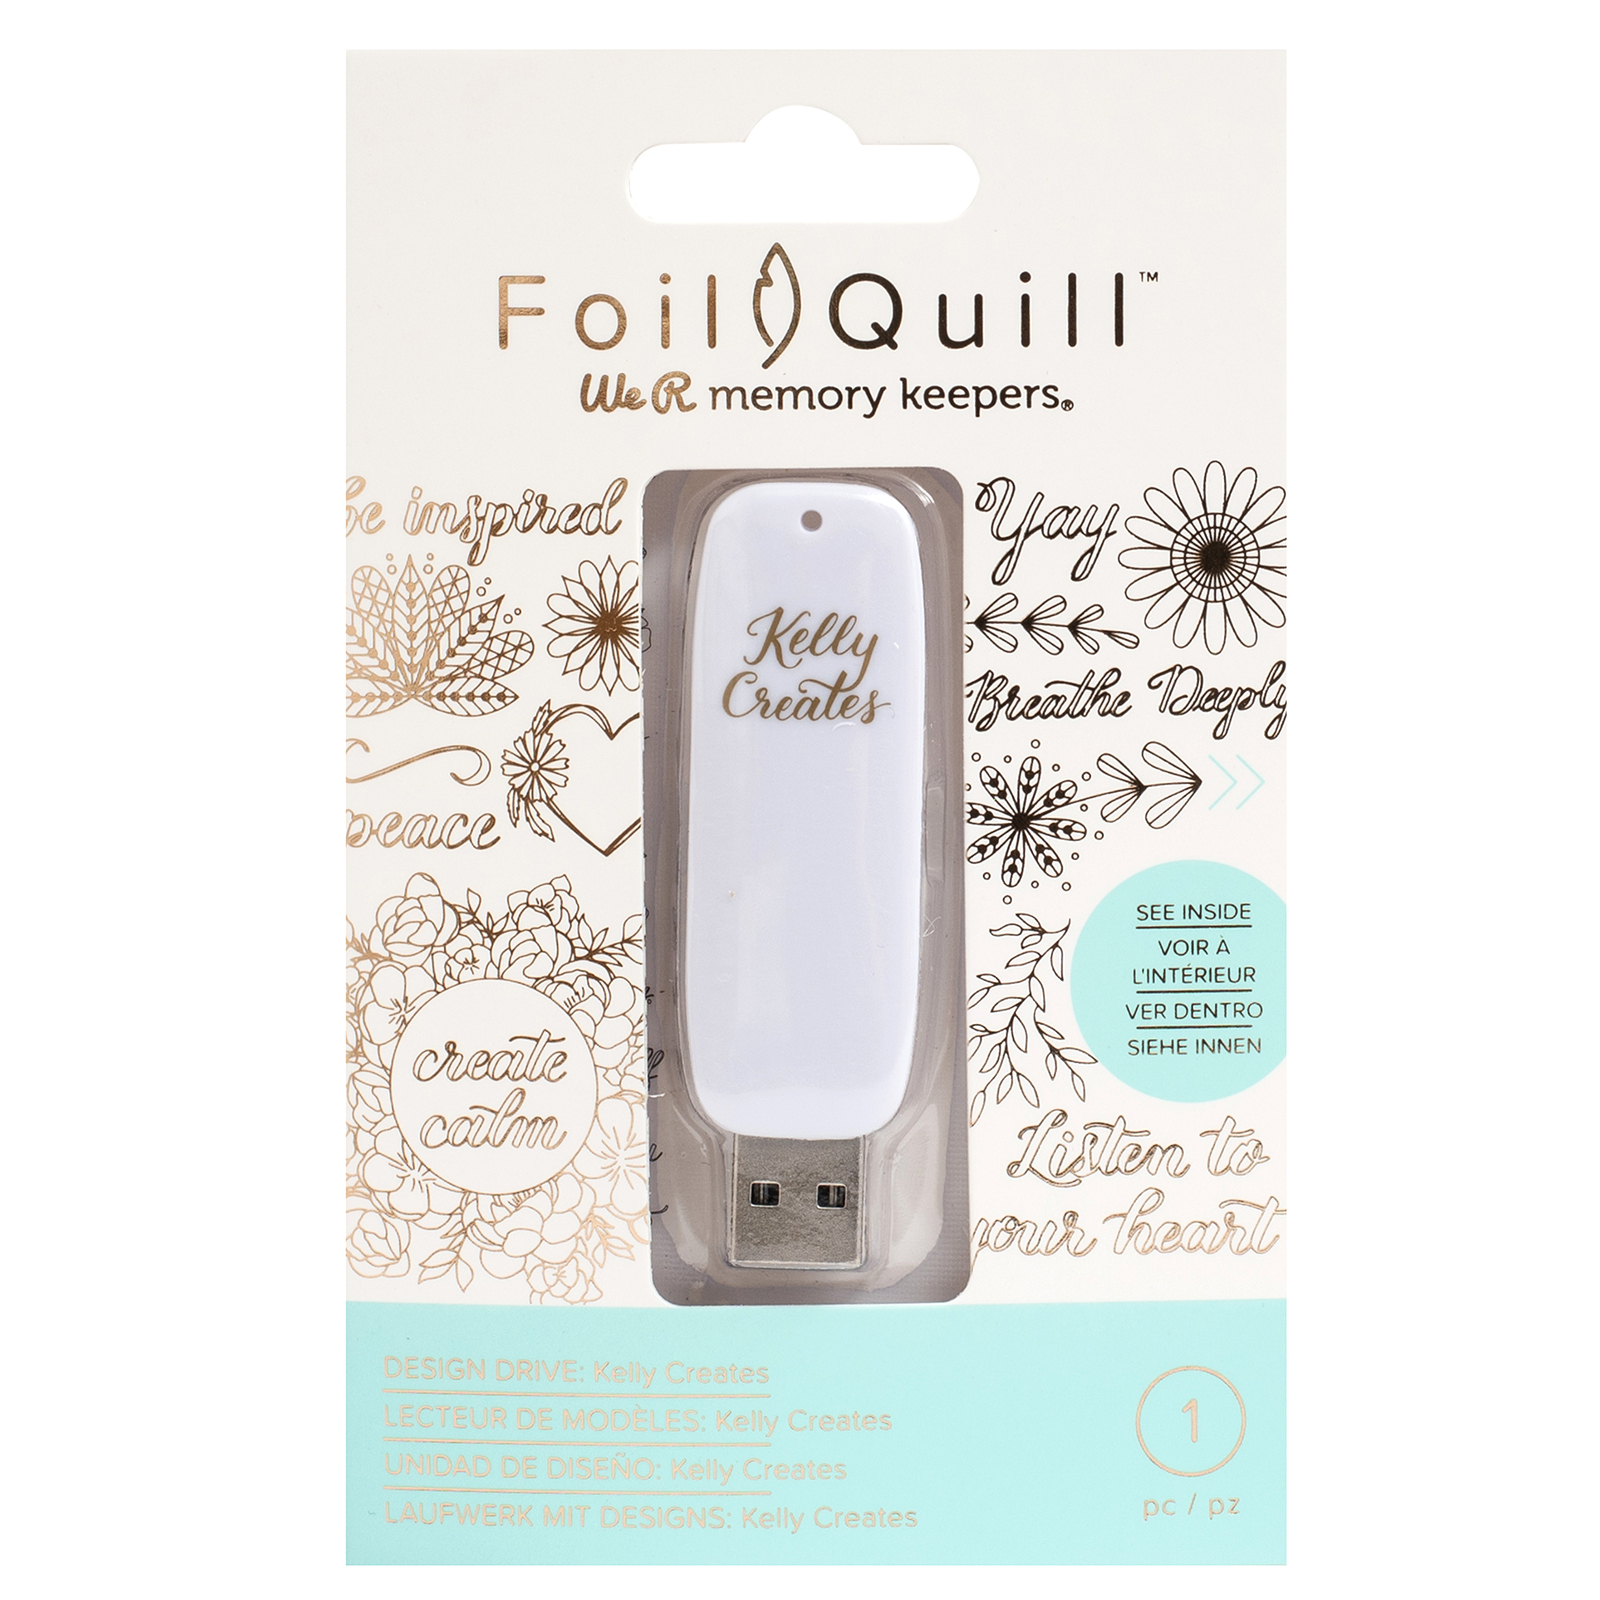 We R Memory Keepers Foil quill – usb art – kelly creates